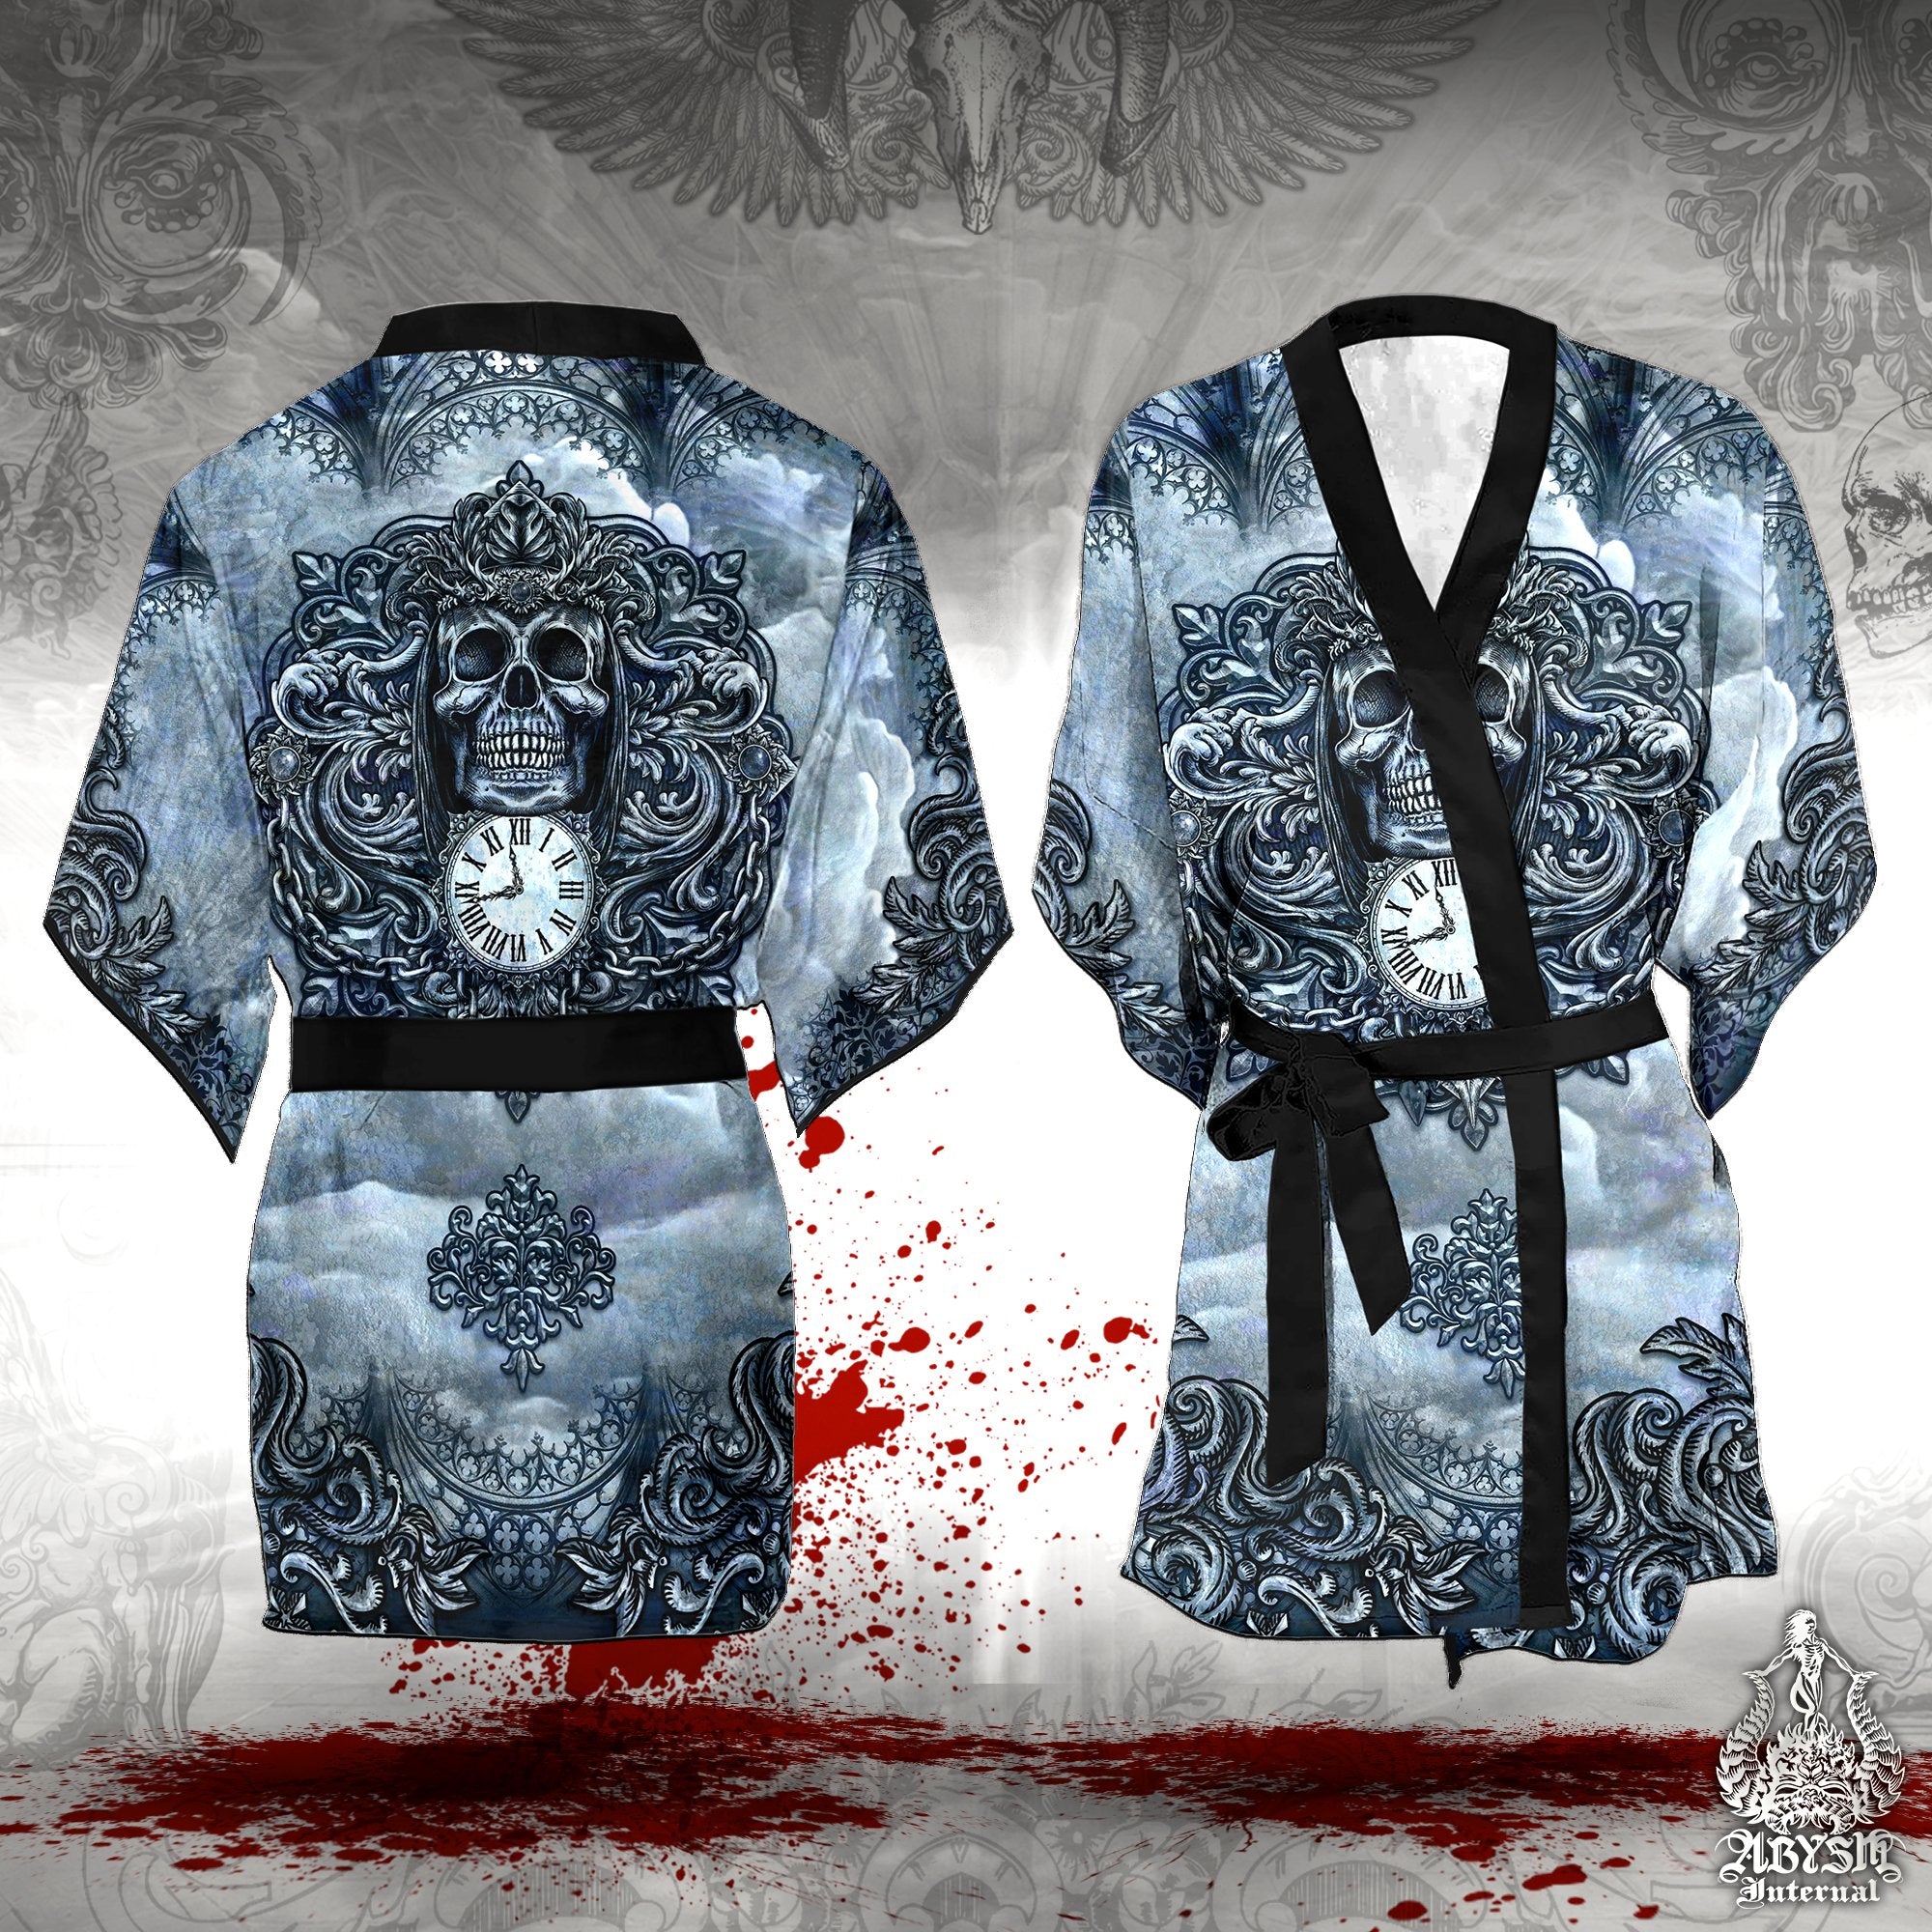 Grim Reaper Short Kimono Robe, Beach Party Outfit, Memento Mori Coverup, Gothic Summer Festival, Goth Alternative Clothing, Unisex - Skull Art, Beige, Grey and Blue, 3 Colors - Abysm Internal